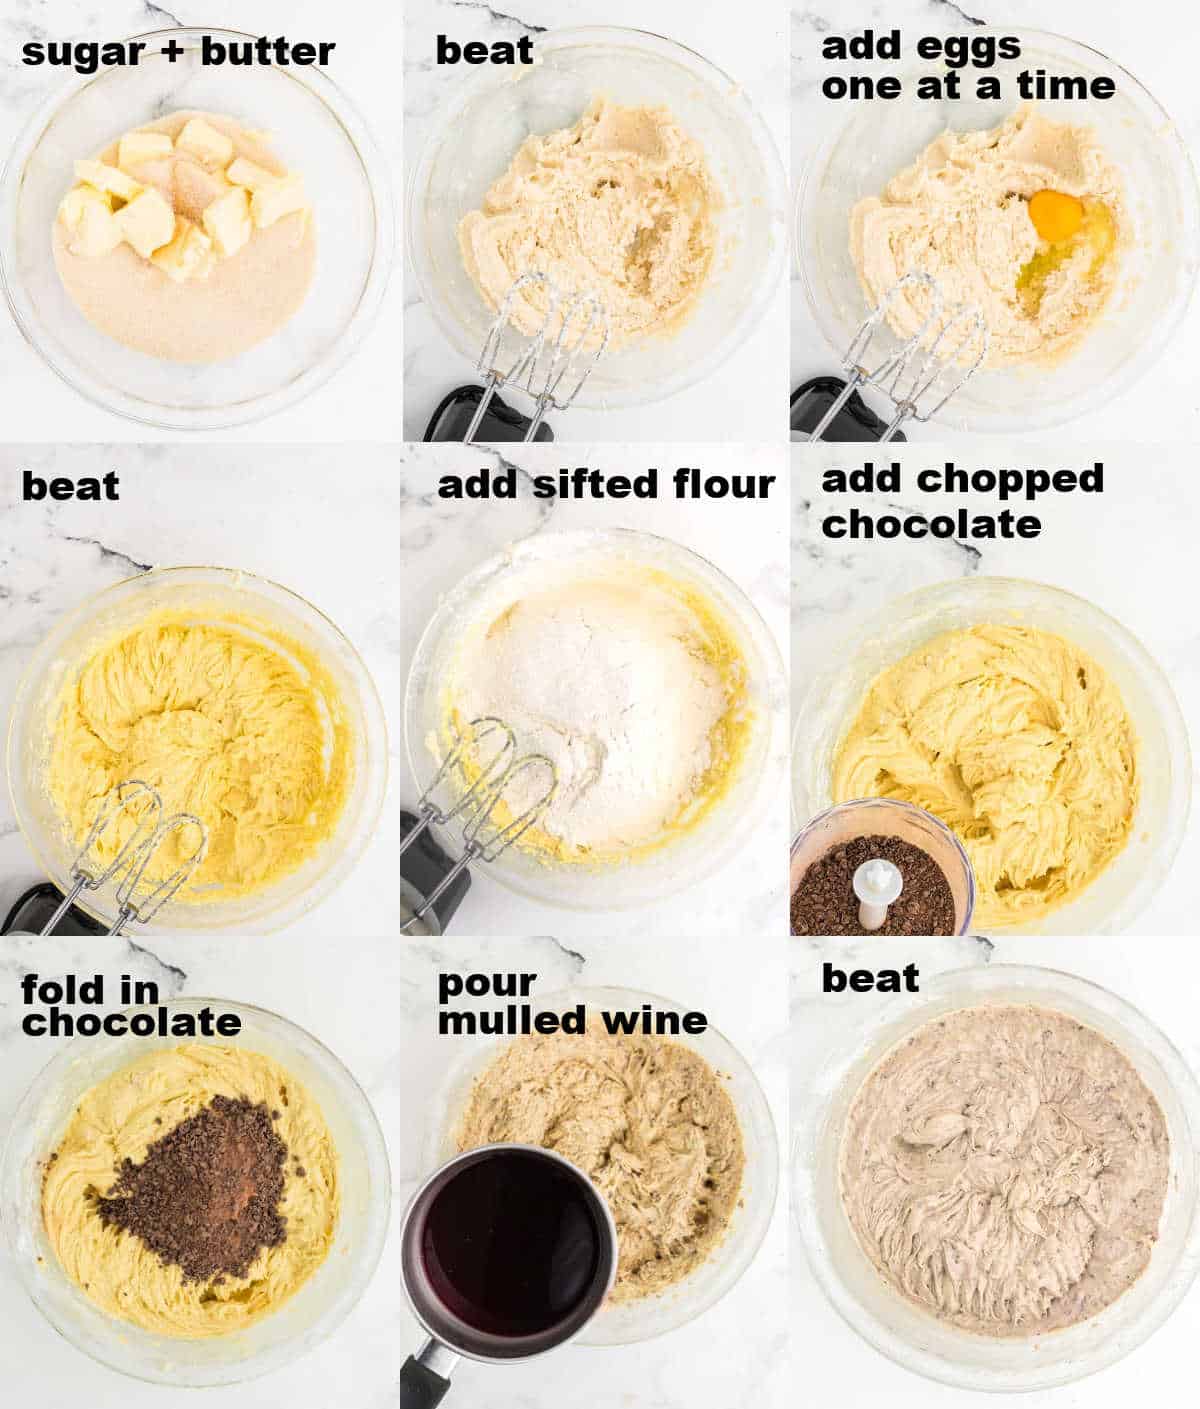 Step-by-step ingredients how to make the Mulled Wine Cake batter.